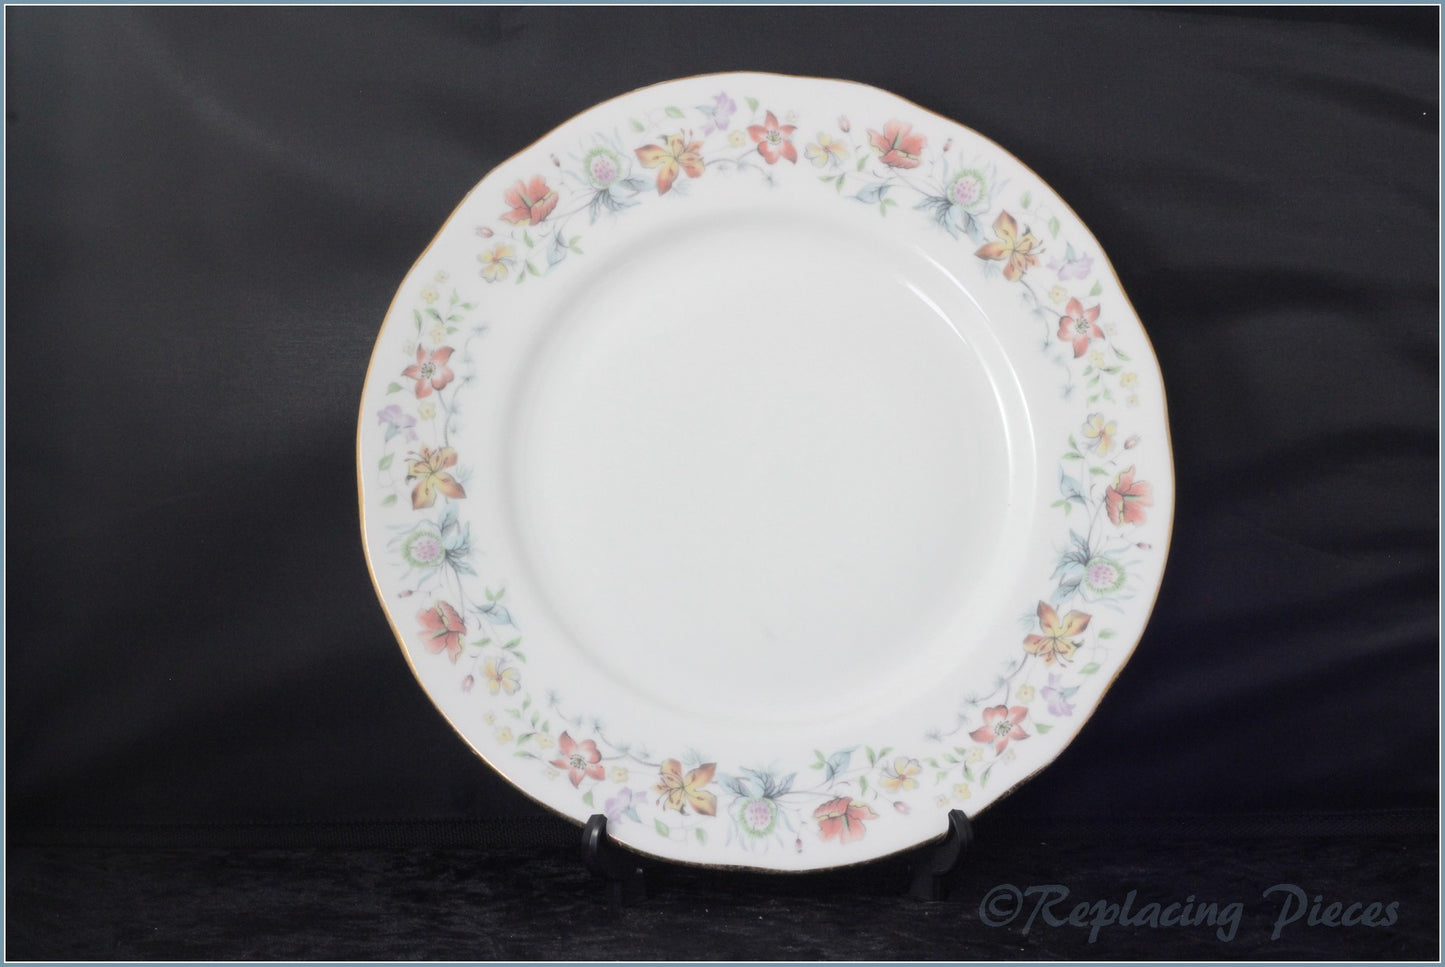 Duchess - Evelyn - 9 1/2" Luncheon Plate